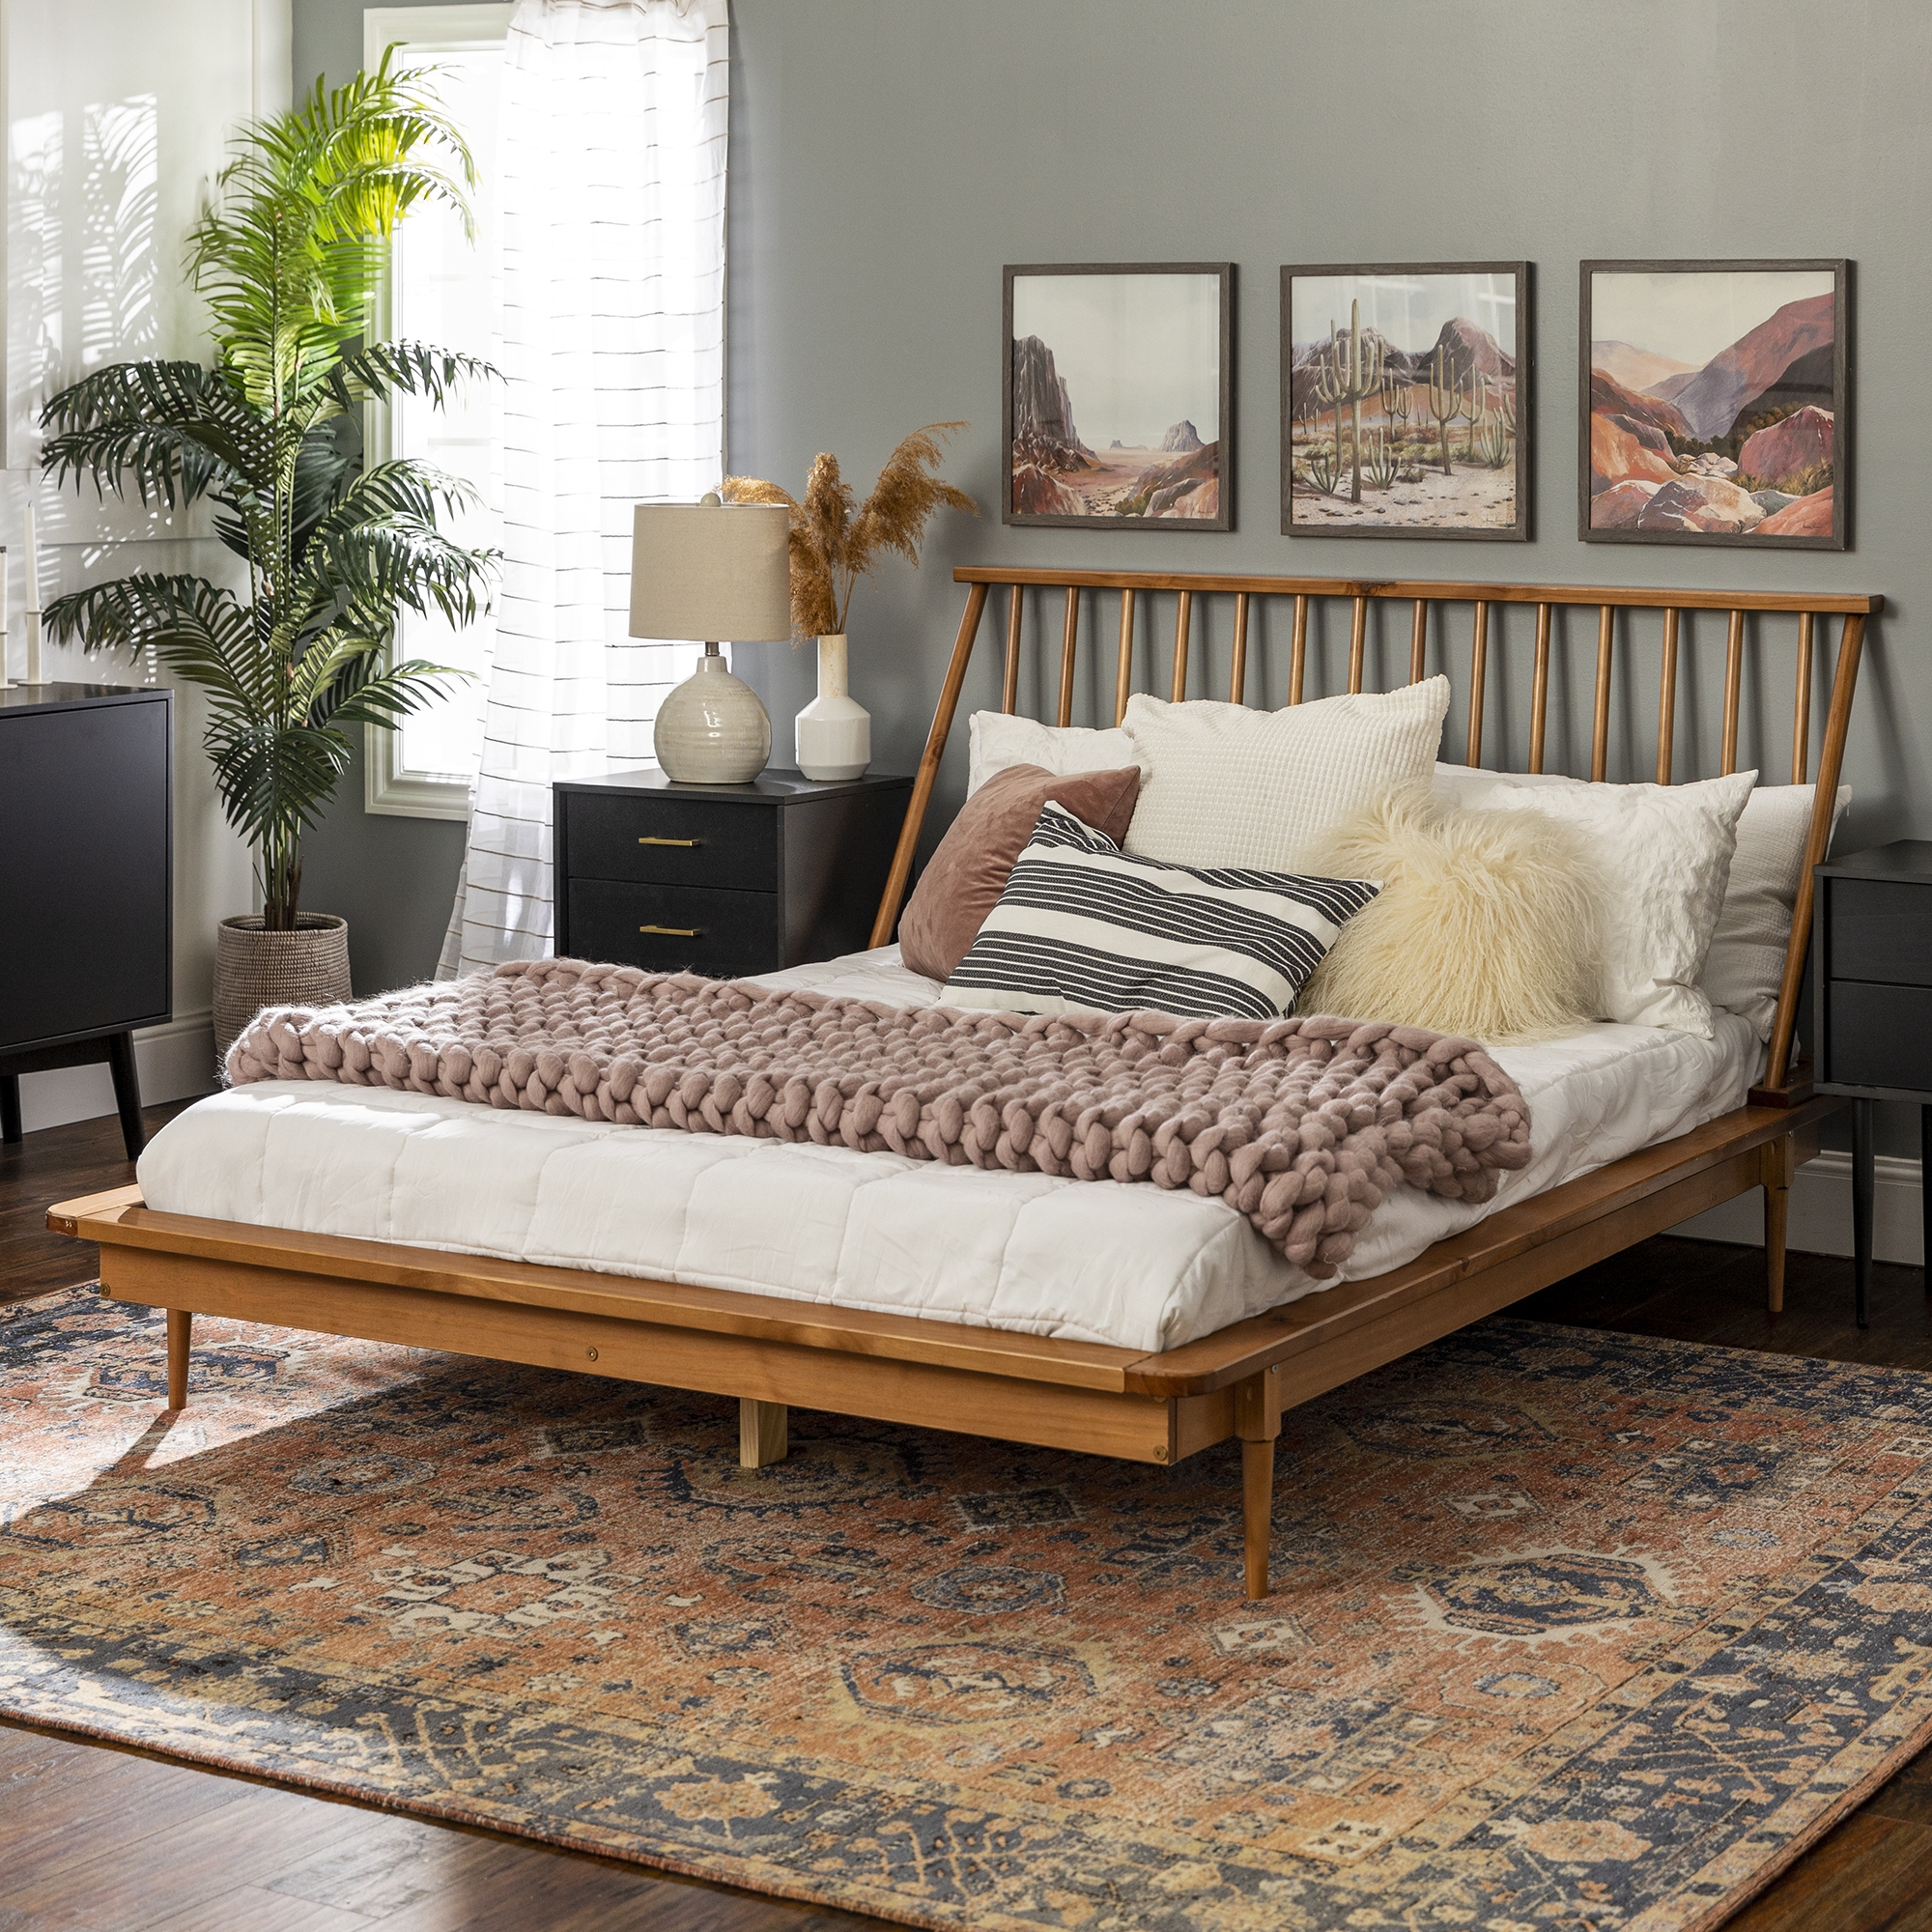 Modern Wood Queen Spindle Bed - Caramel - Image 4